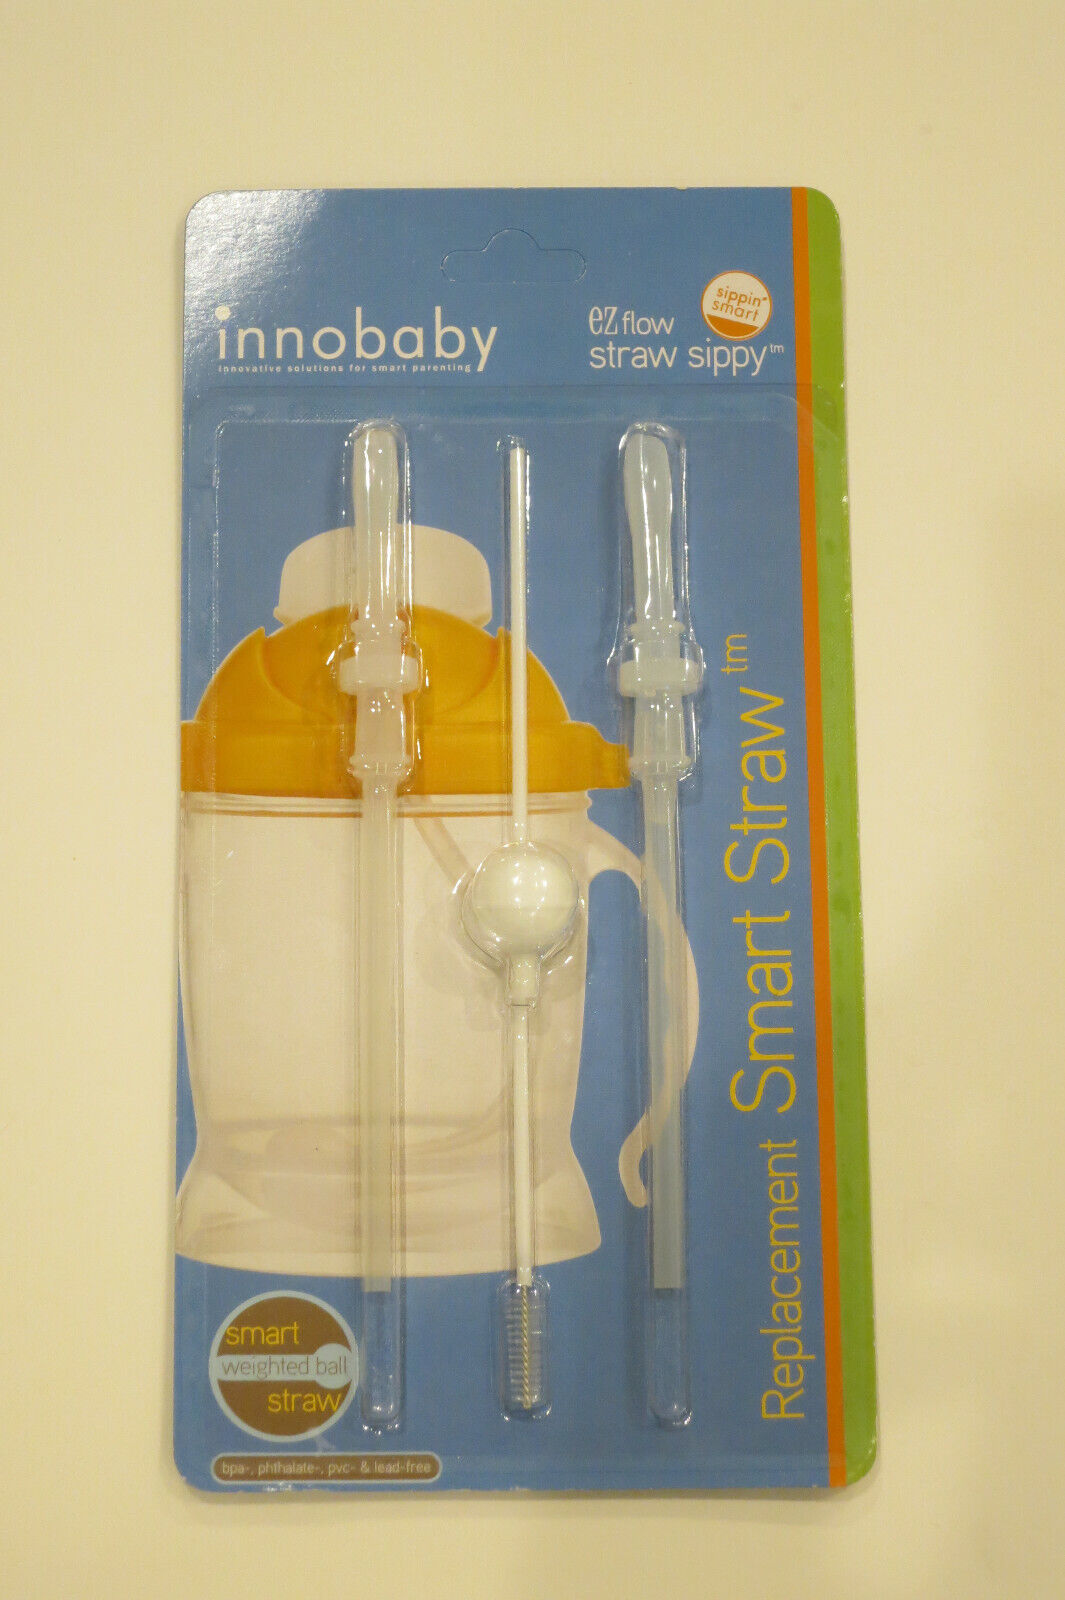 Innobaby Sippin' Smart Ez Flow Straw Sippy Accessory Kit W/ Cleaning Brush